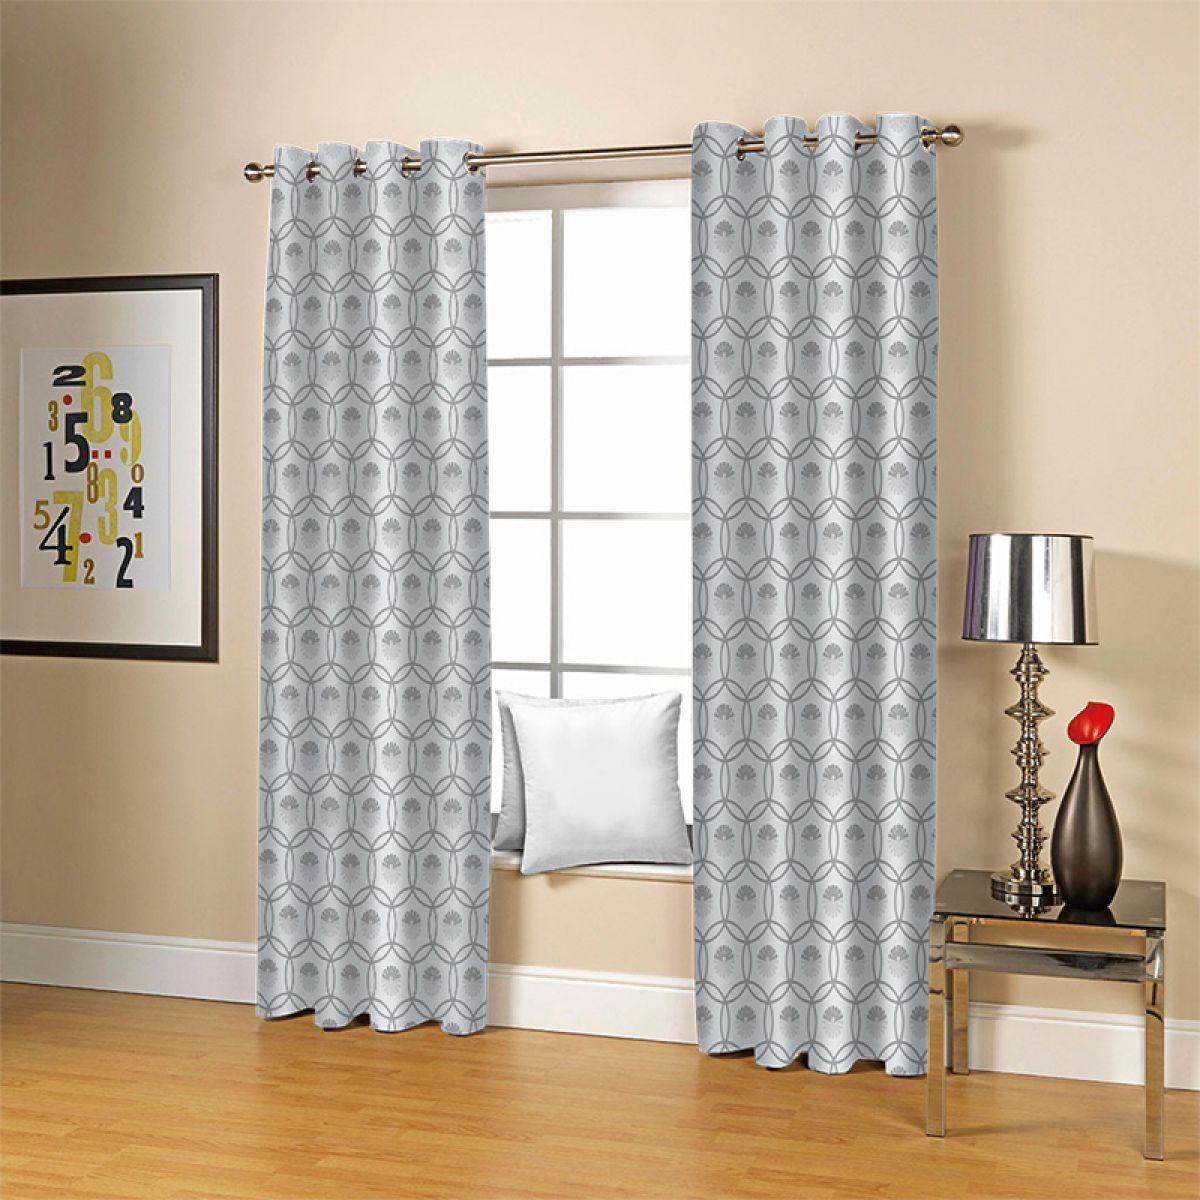 3d intersecting circles printed window curtain home decor 7430